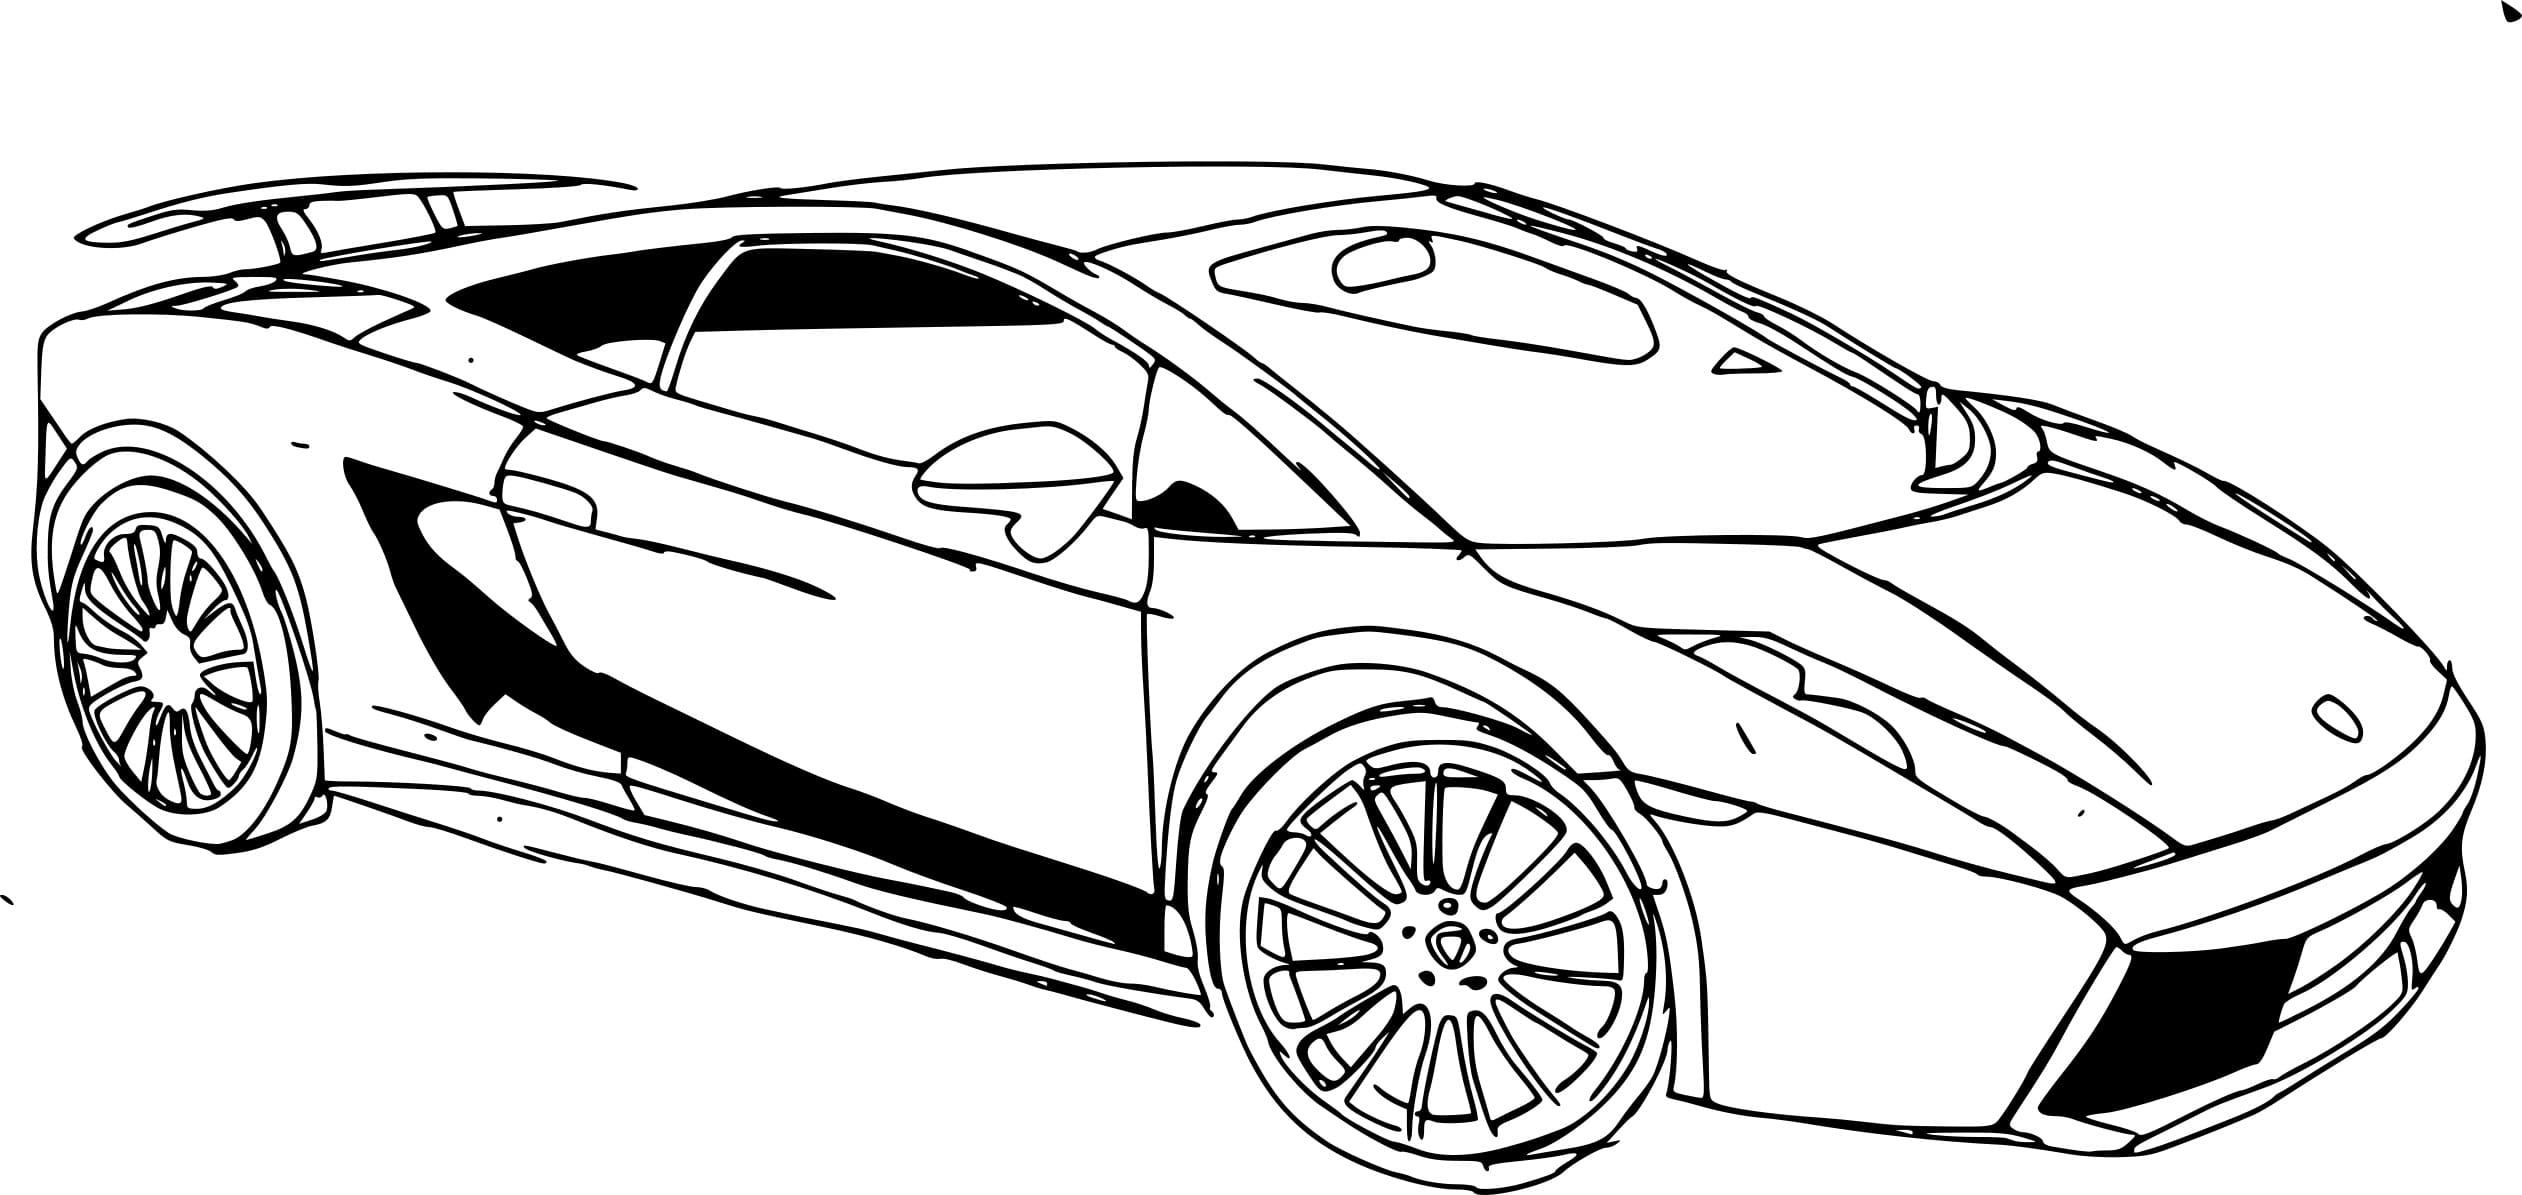 race-car-coloring-pages-side-view